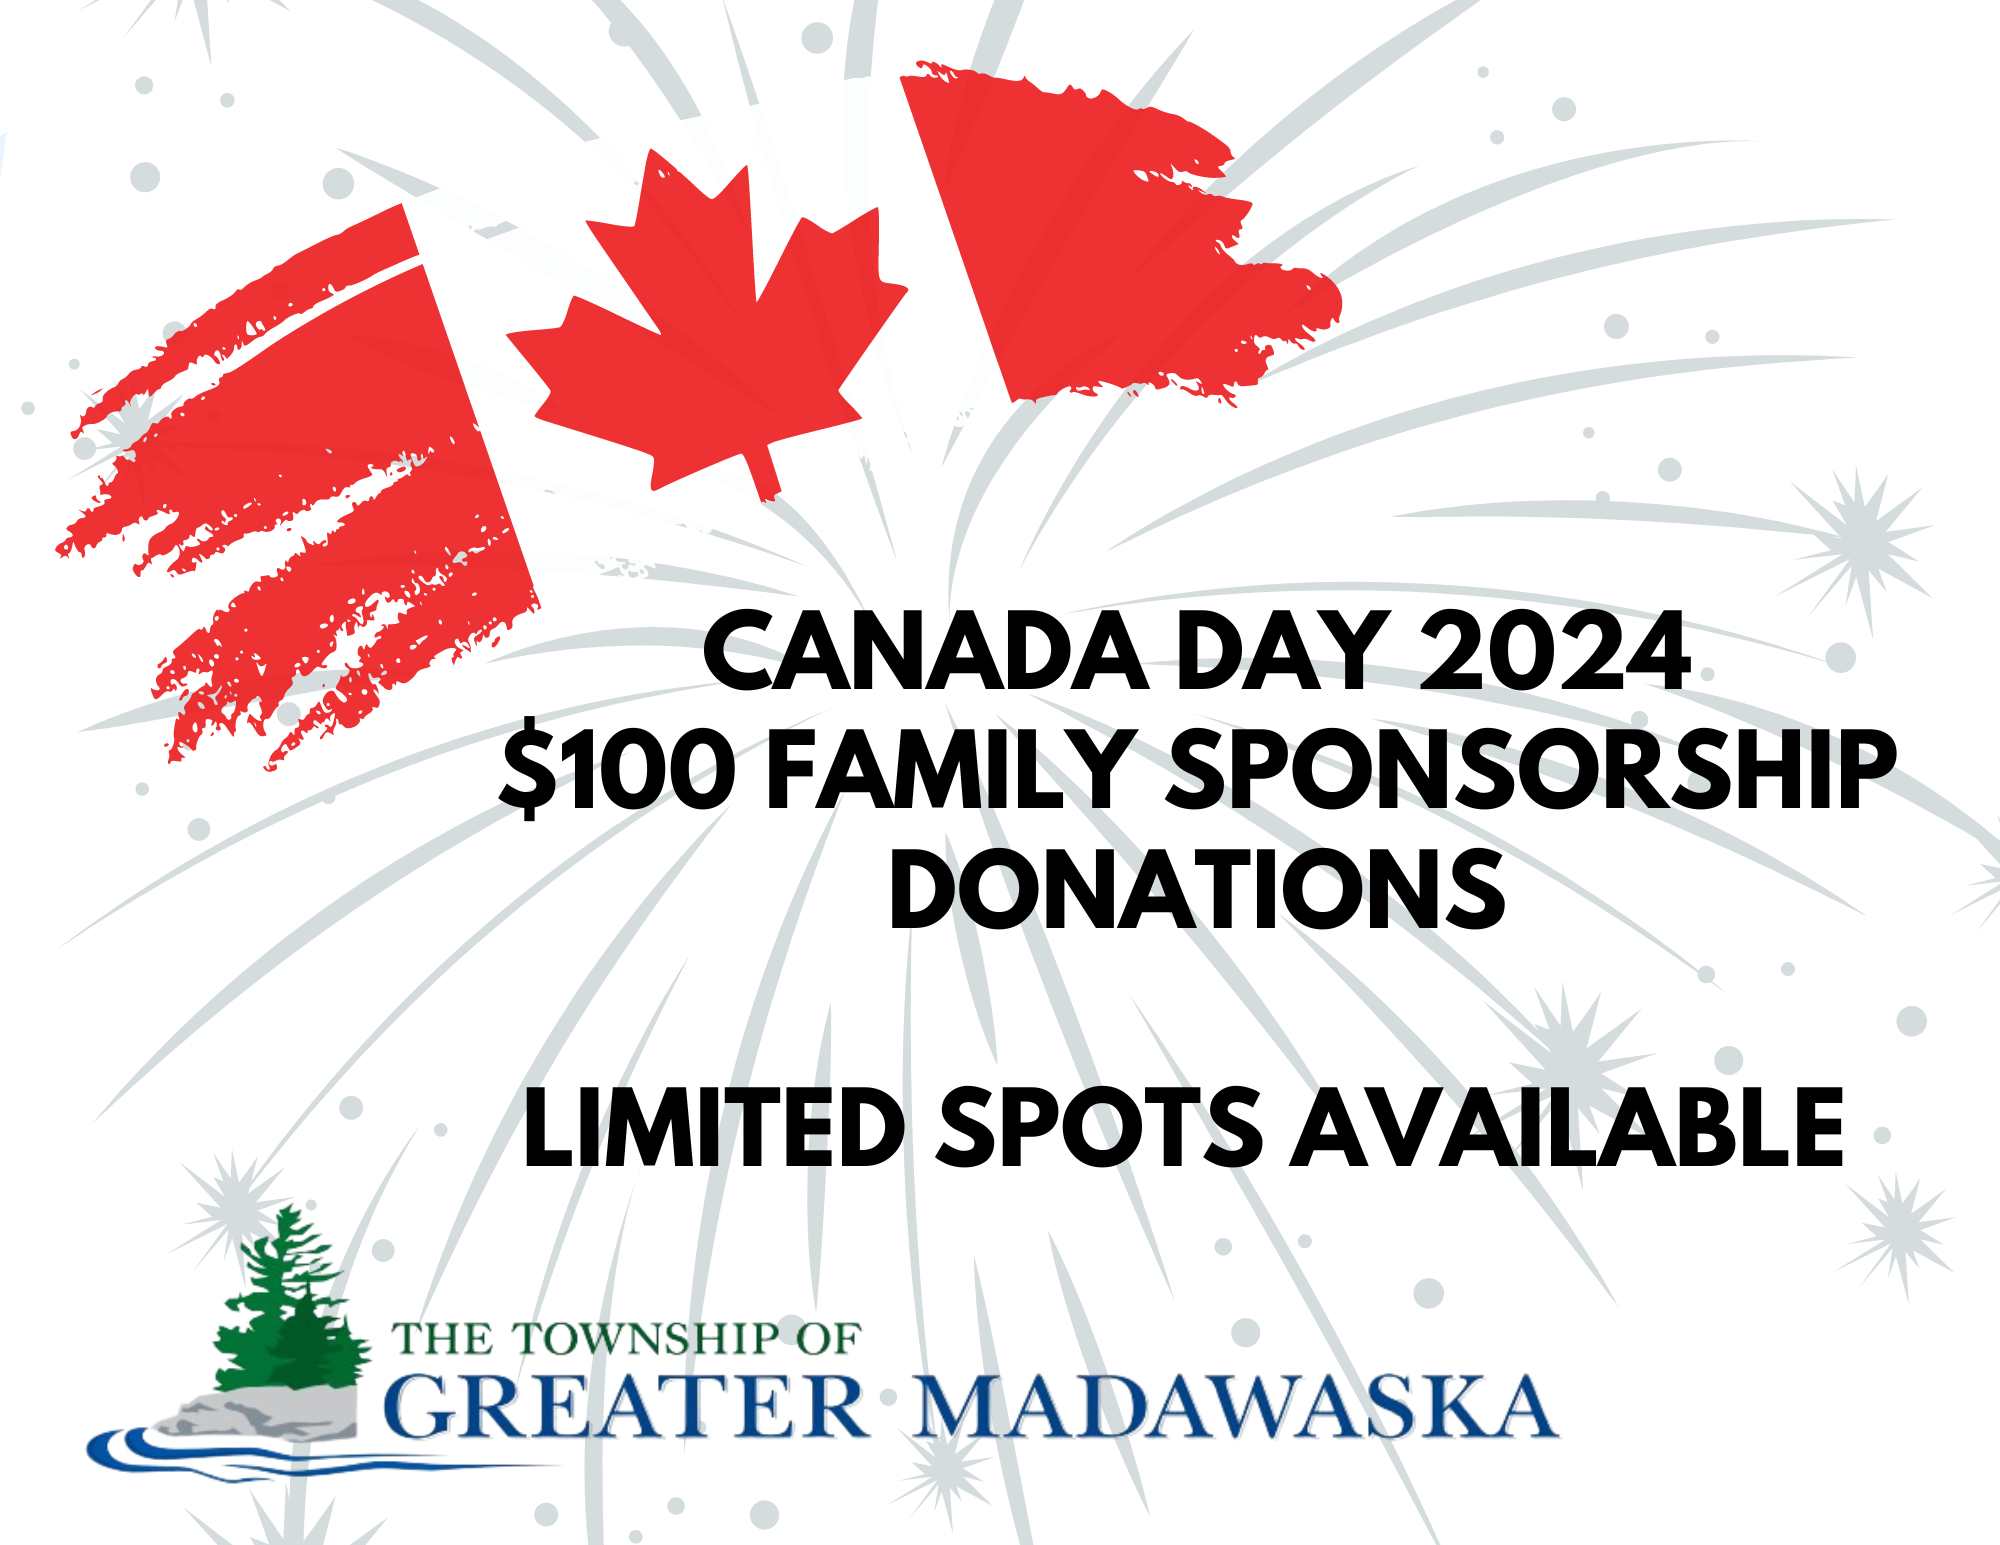 Poster Calling for Family Sponsorships for Canada Day